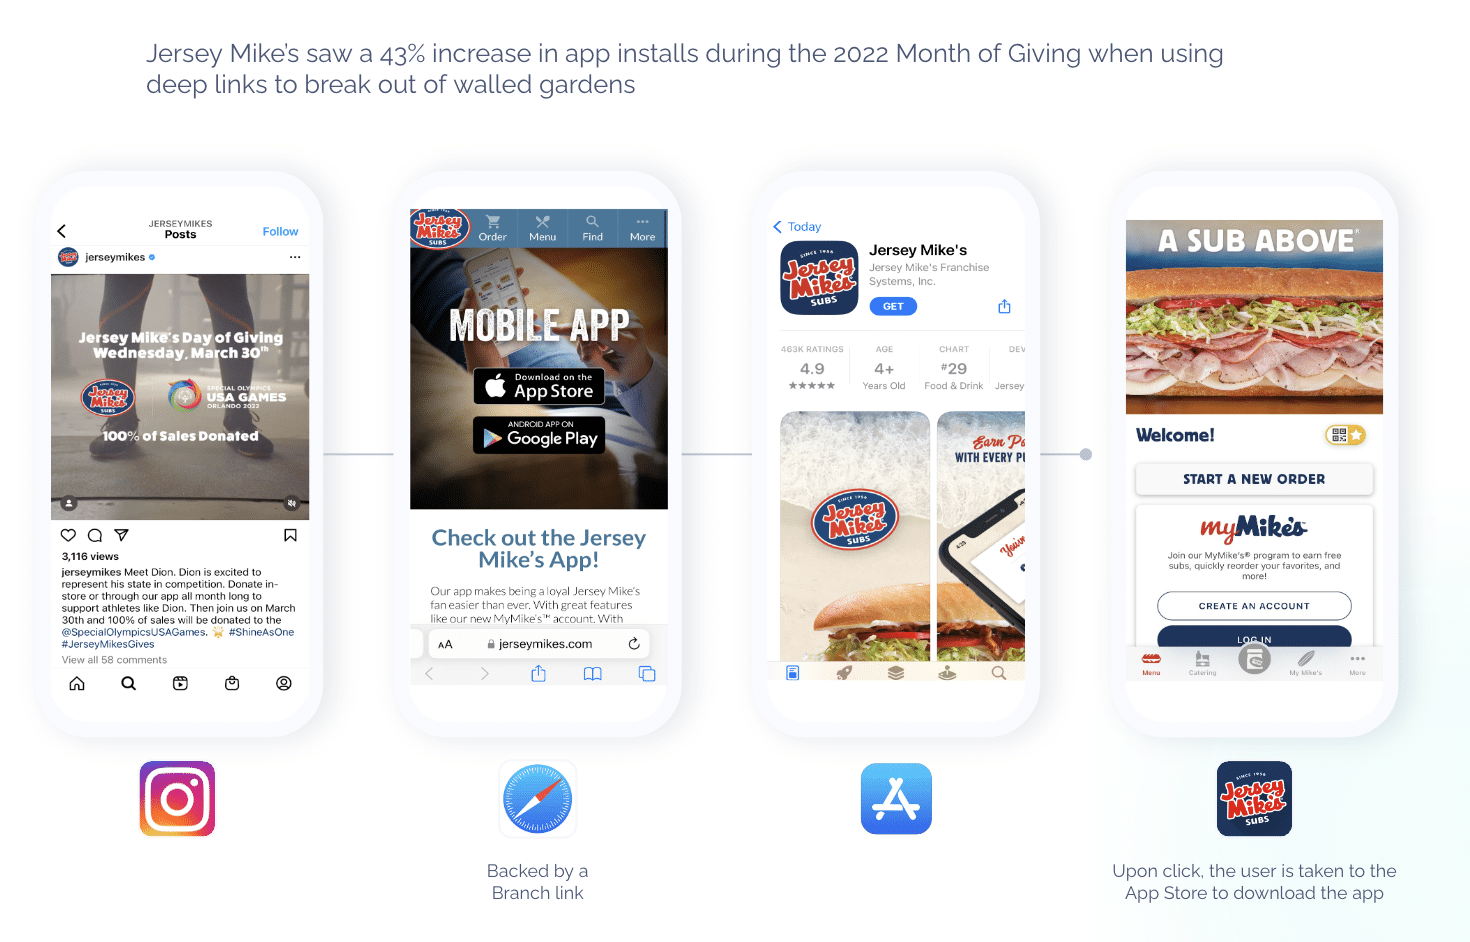 Jersey Mike's saw a 43% increase in app installs during the 2022 Month of Giving when using deep links to break out of walled gardens Four images of smart phones showing Jersey Mike's use of deep links: 1. Instagram add for Jersey Mike's 2. Safari (destination of Instagram post), where user is prompted to download the app -- "Backed by a Branch link" 3. Jersey Mike's app in the app store 4. Jersey Mike's app opened -- "Upon click the user is taken to the App Store to download the app"